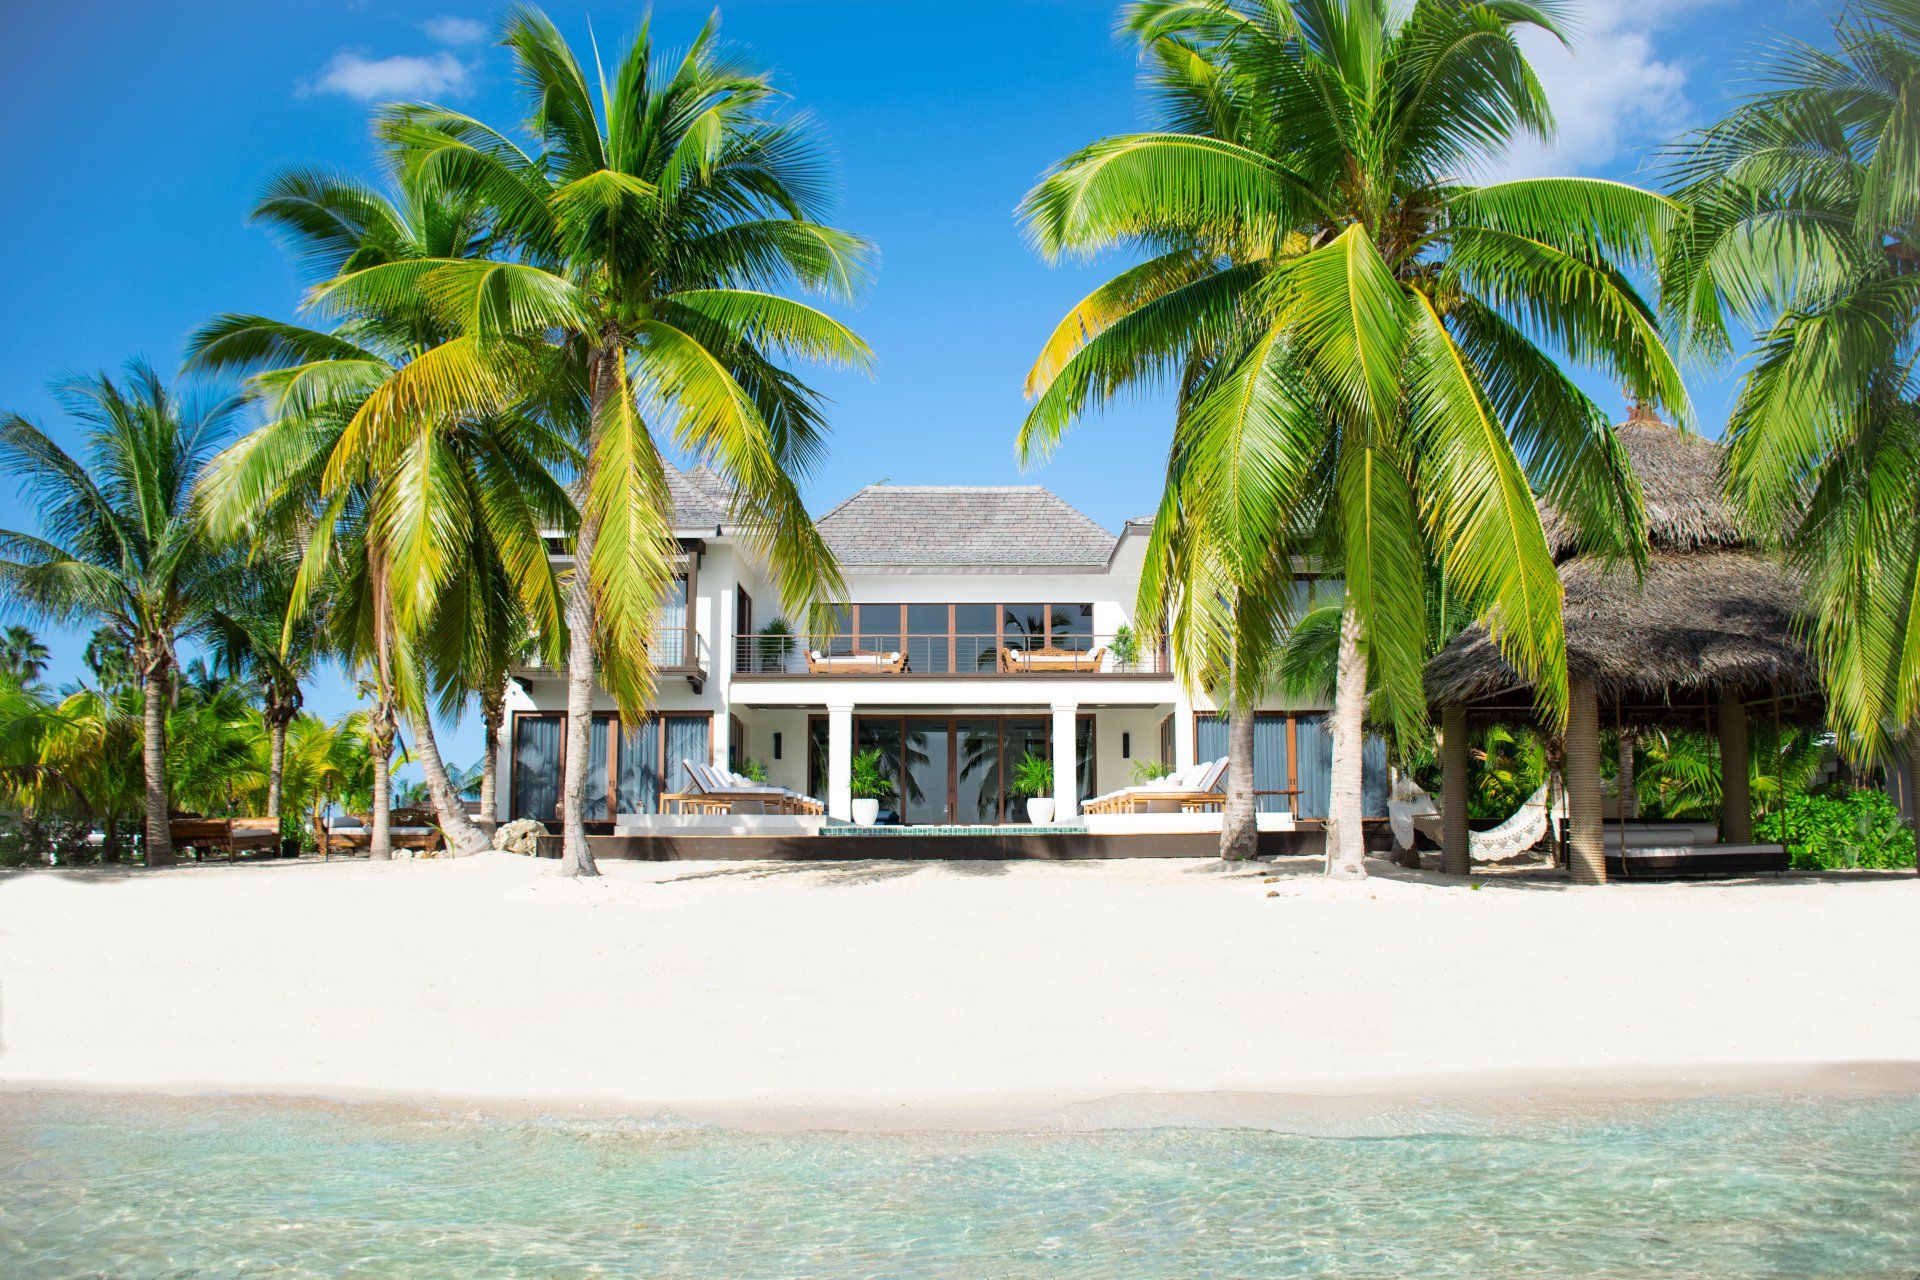 there is a large house on the beach surrounded by palm trees